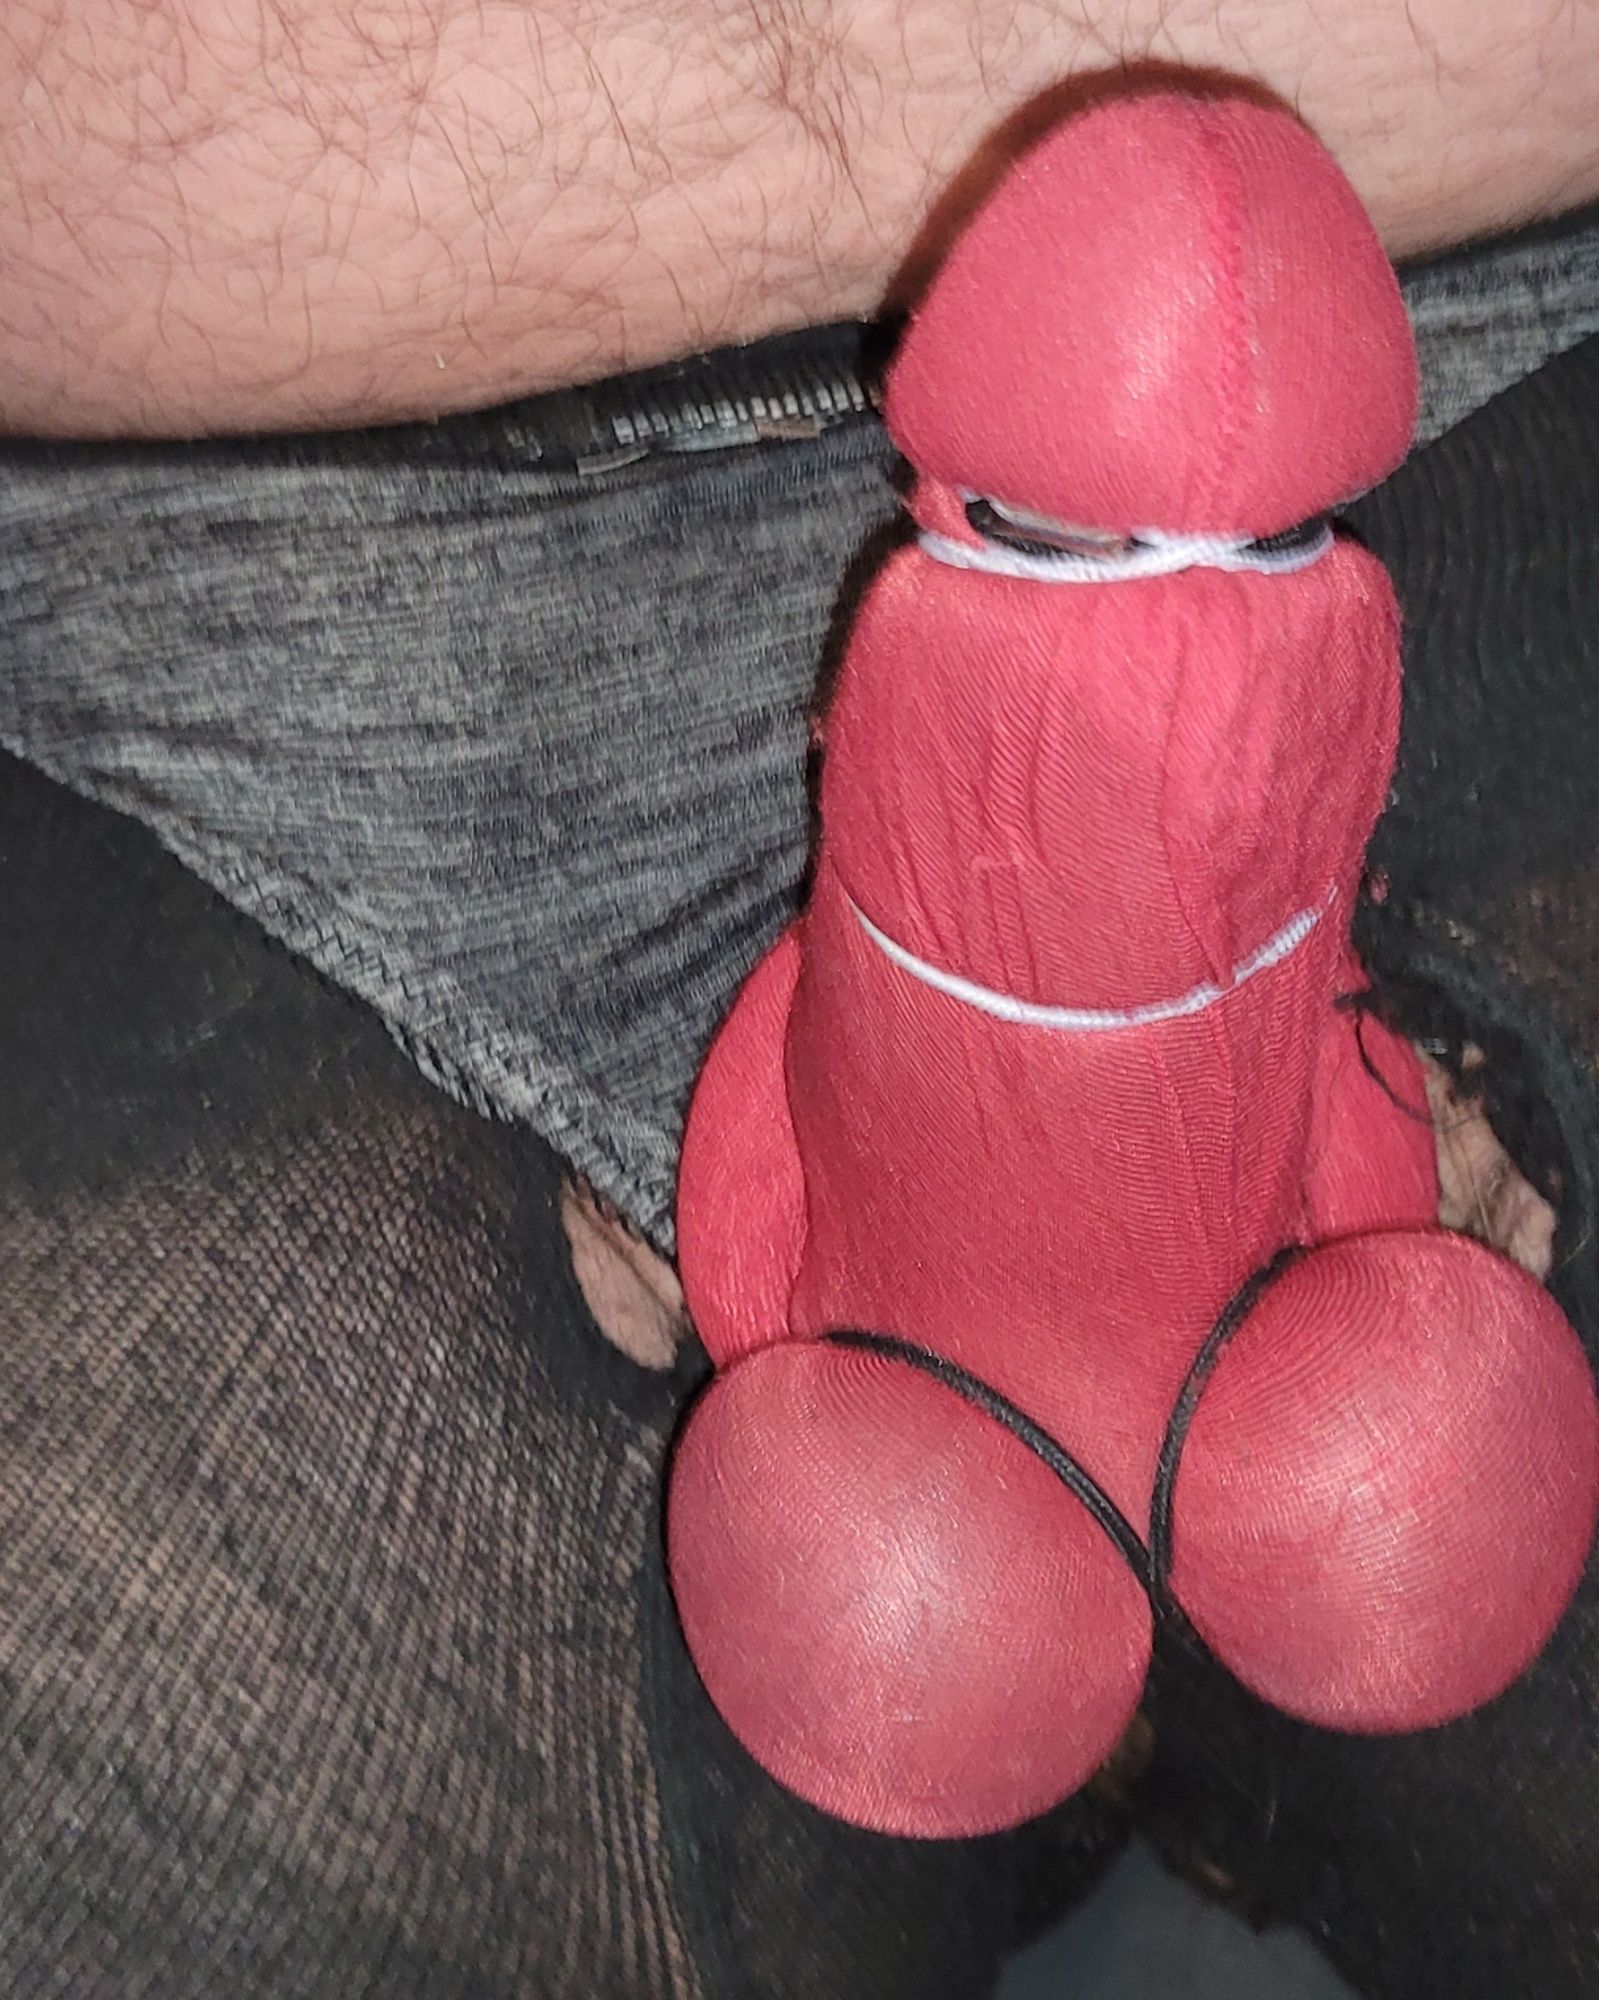 My Cock #6